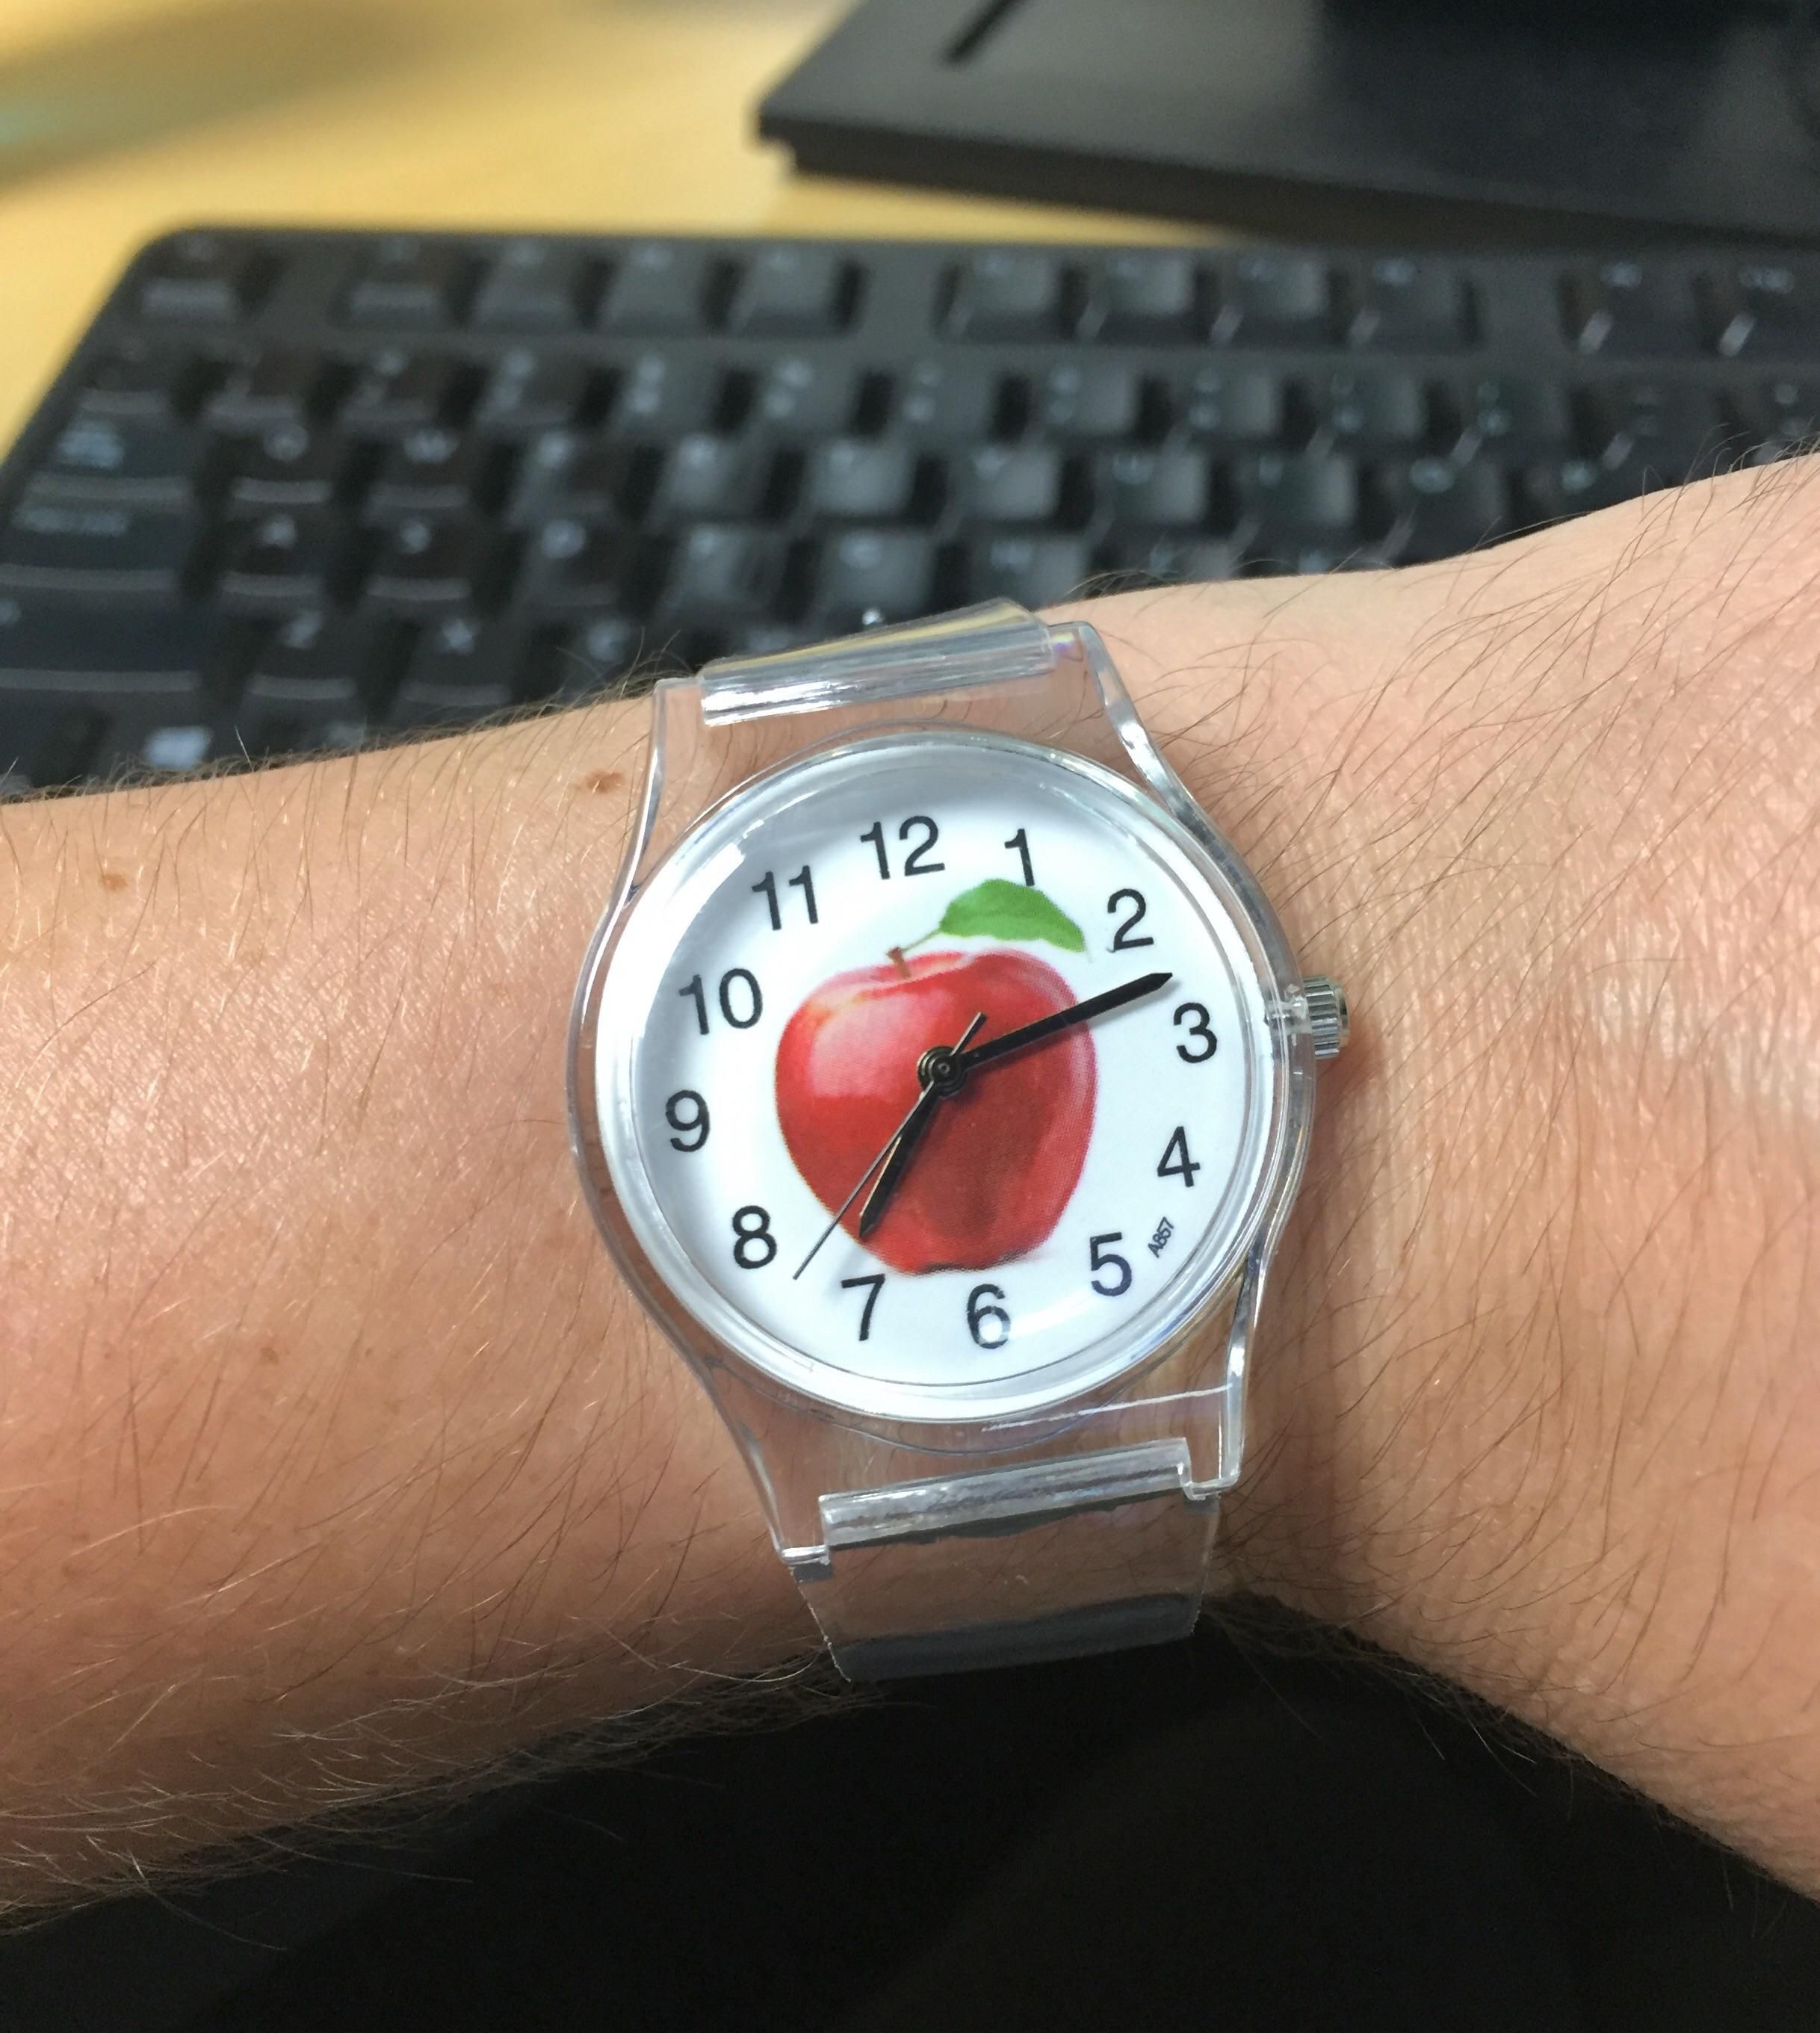 I asked for an Apple Watch for my birthday. This is what I got.